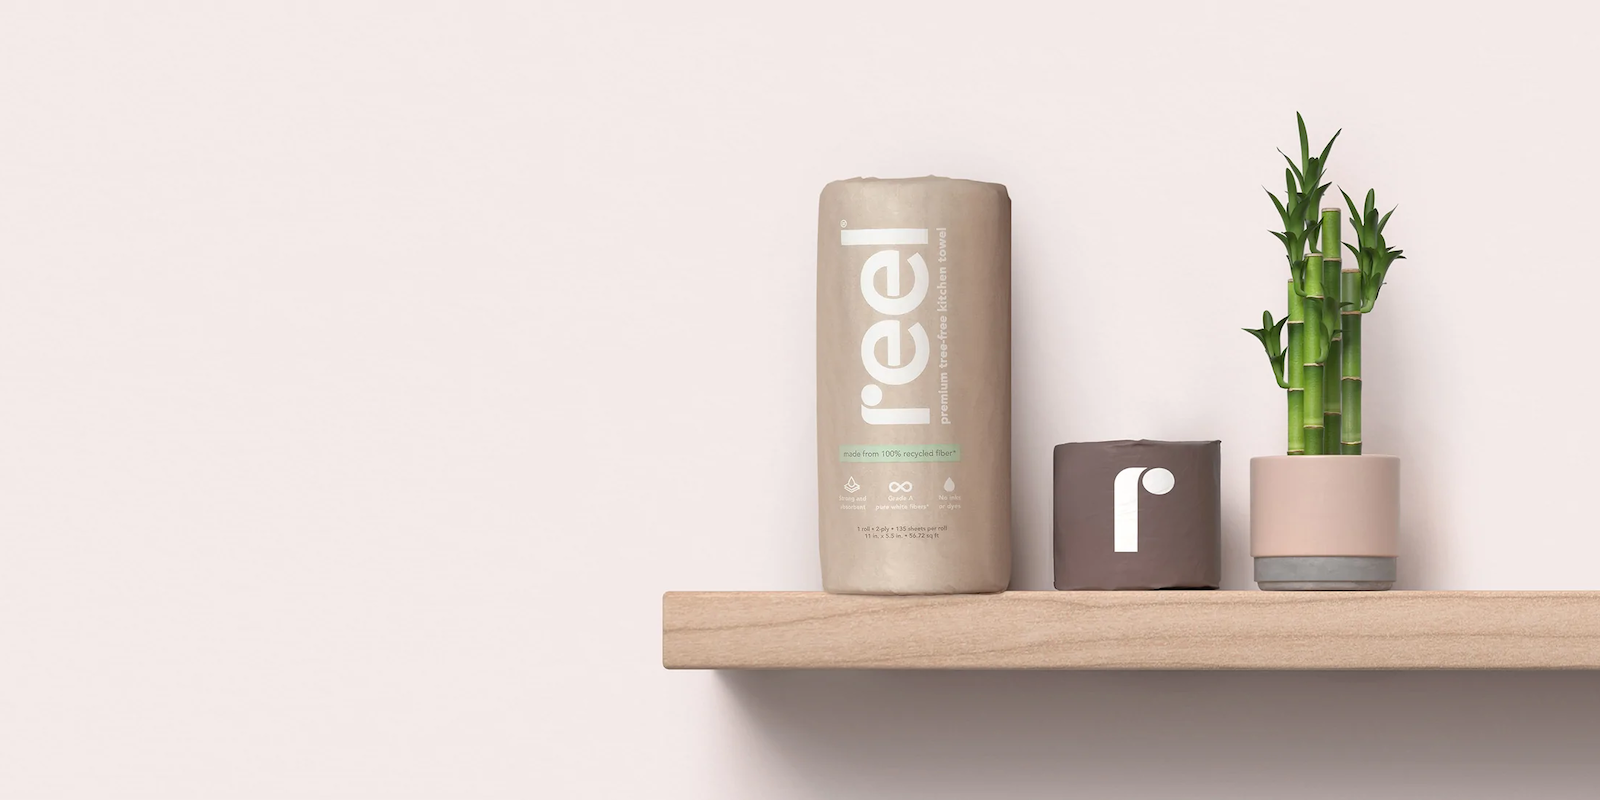 Reel Paper The Sustainable Toilet Paper Brand Shores Up Supply Chain 